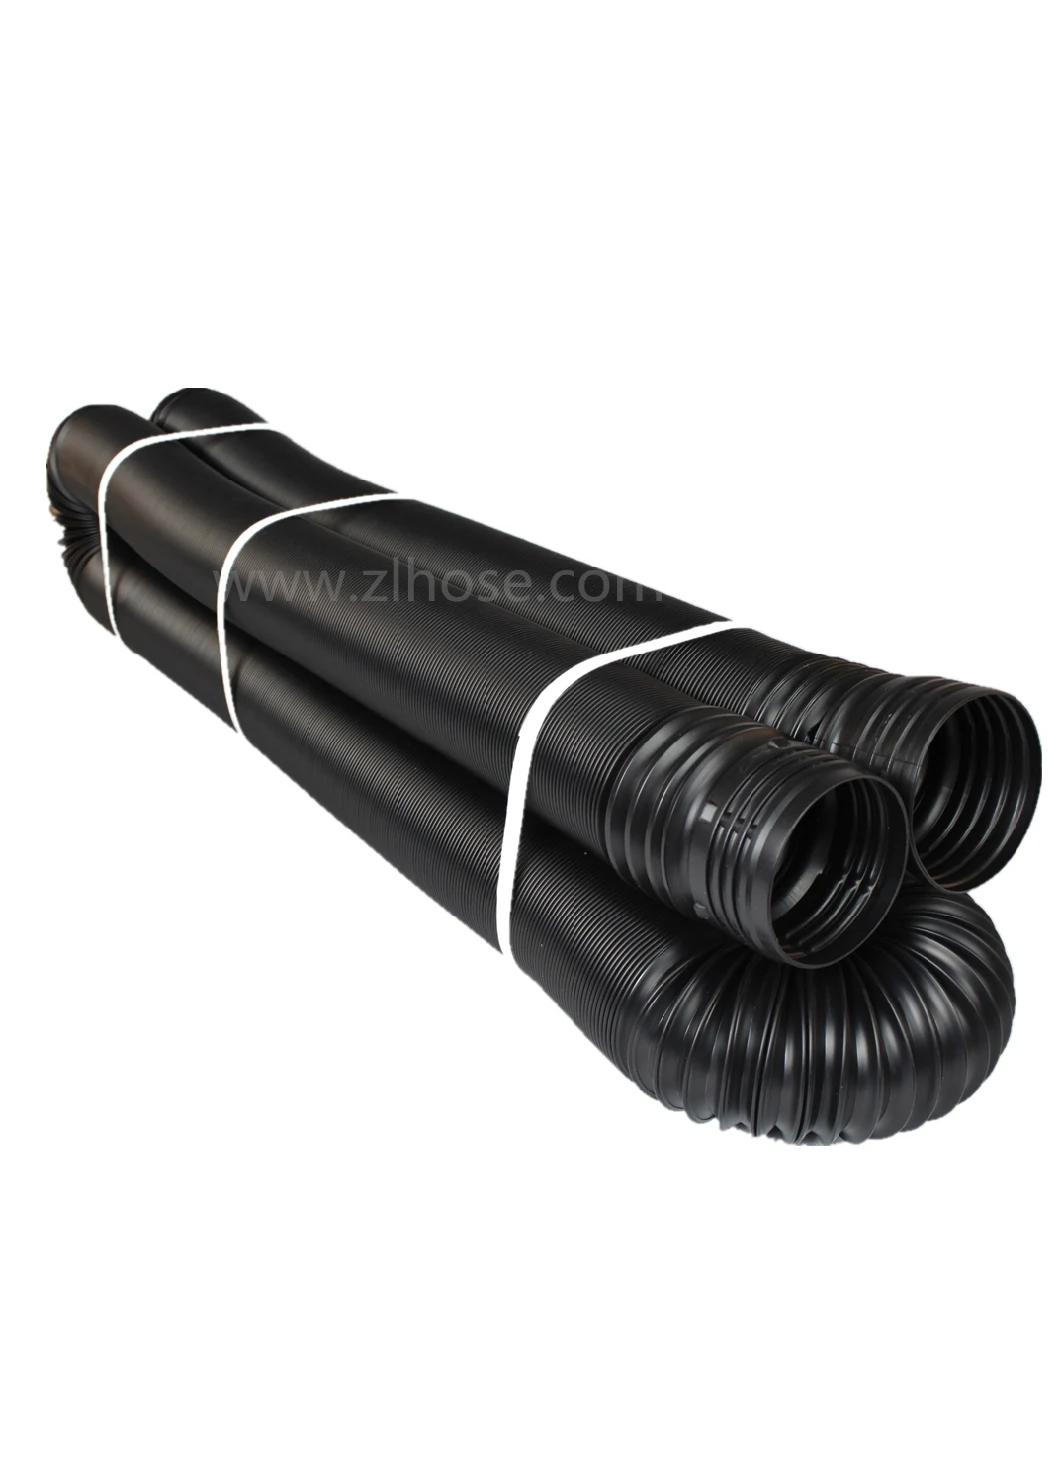 Flexible Non-Perforated Water Pipe 100mm (4") X 35′